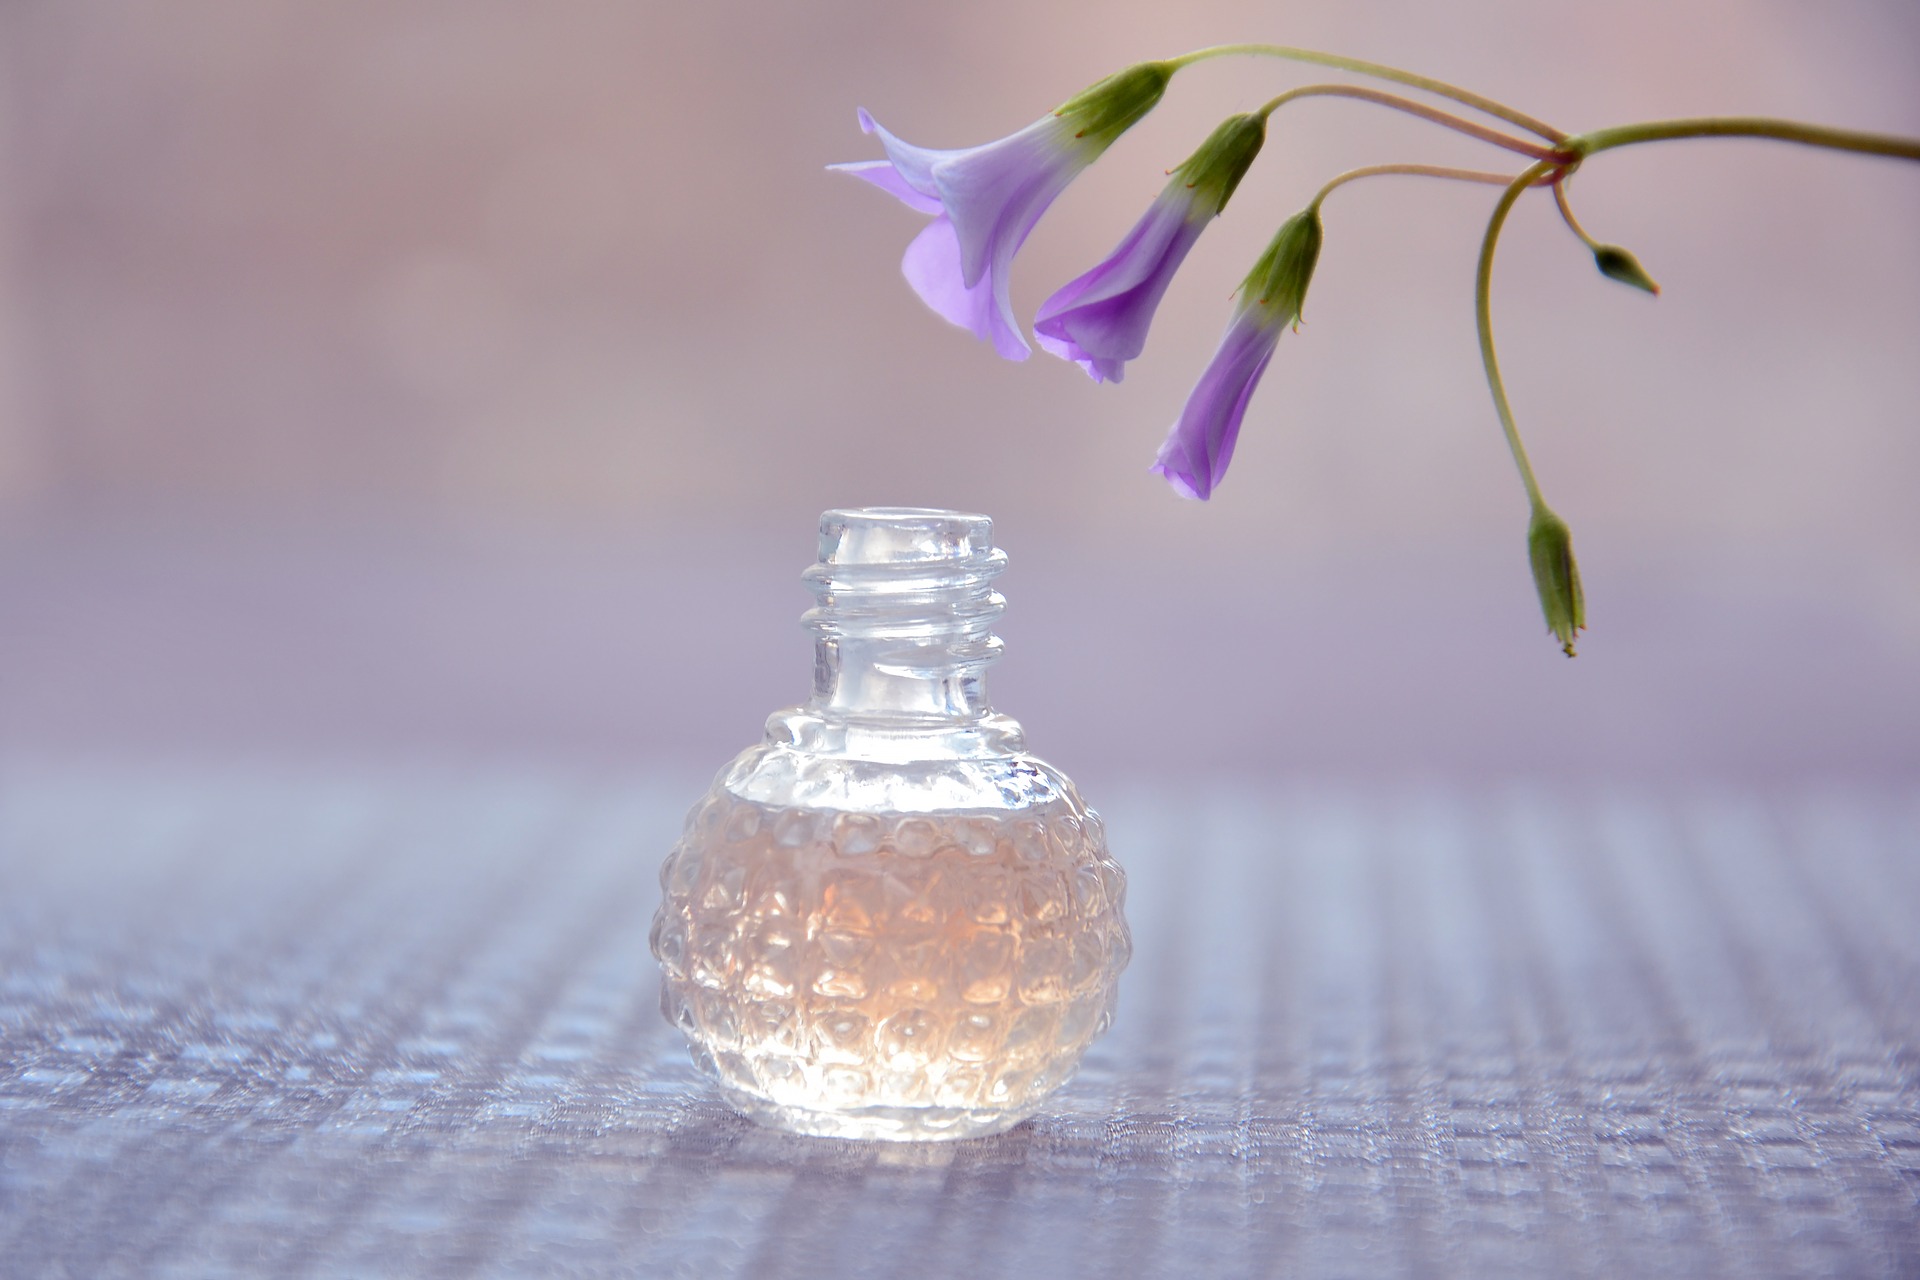 Essential oils for aromatherapy